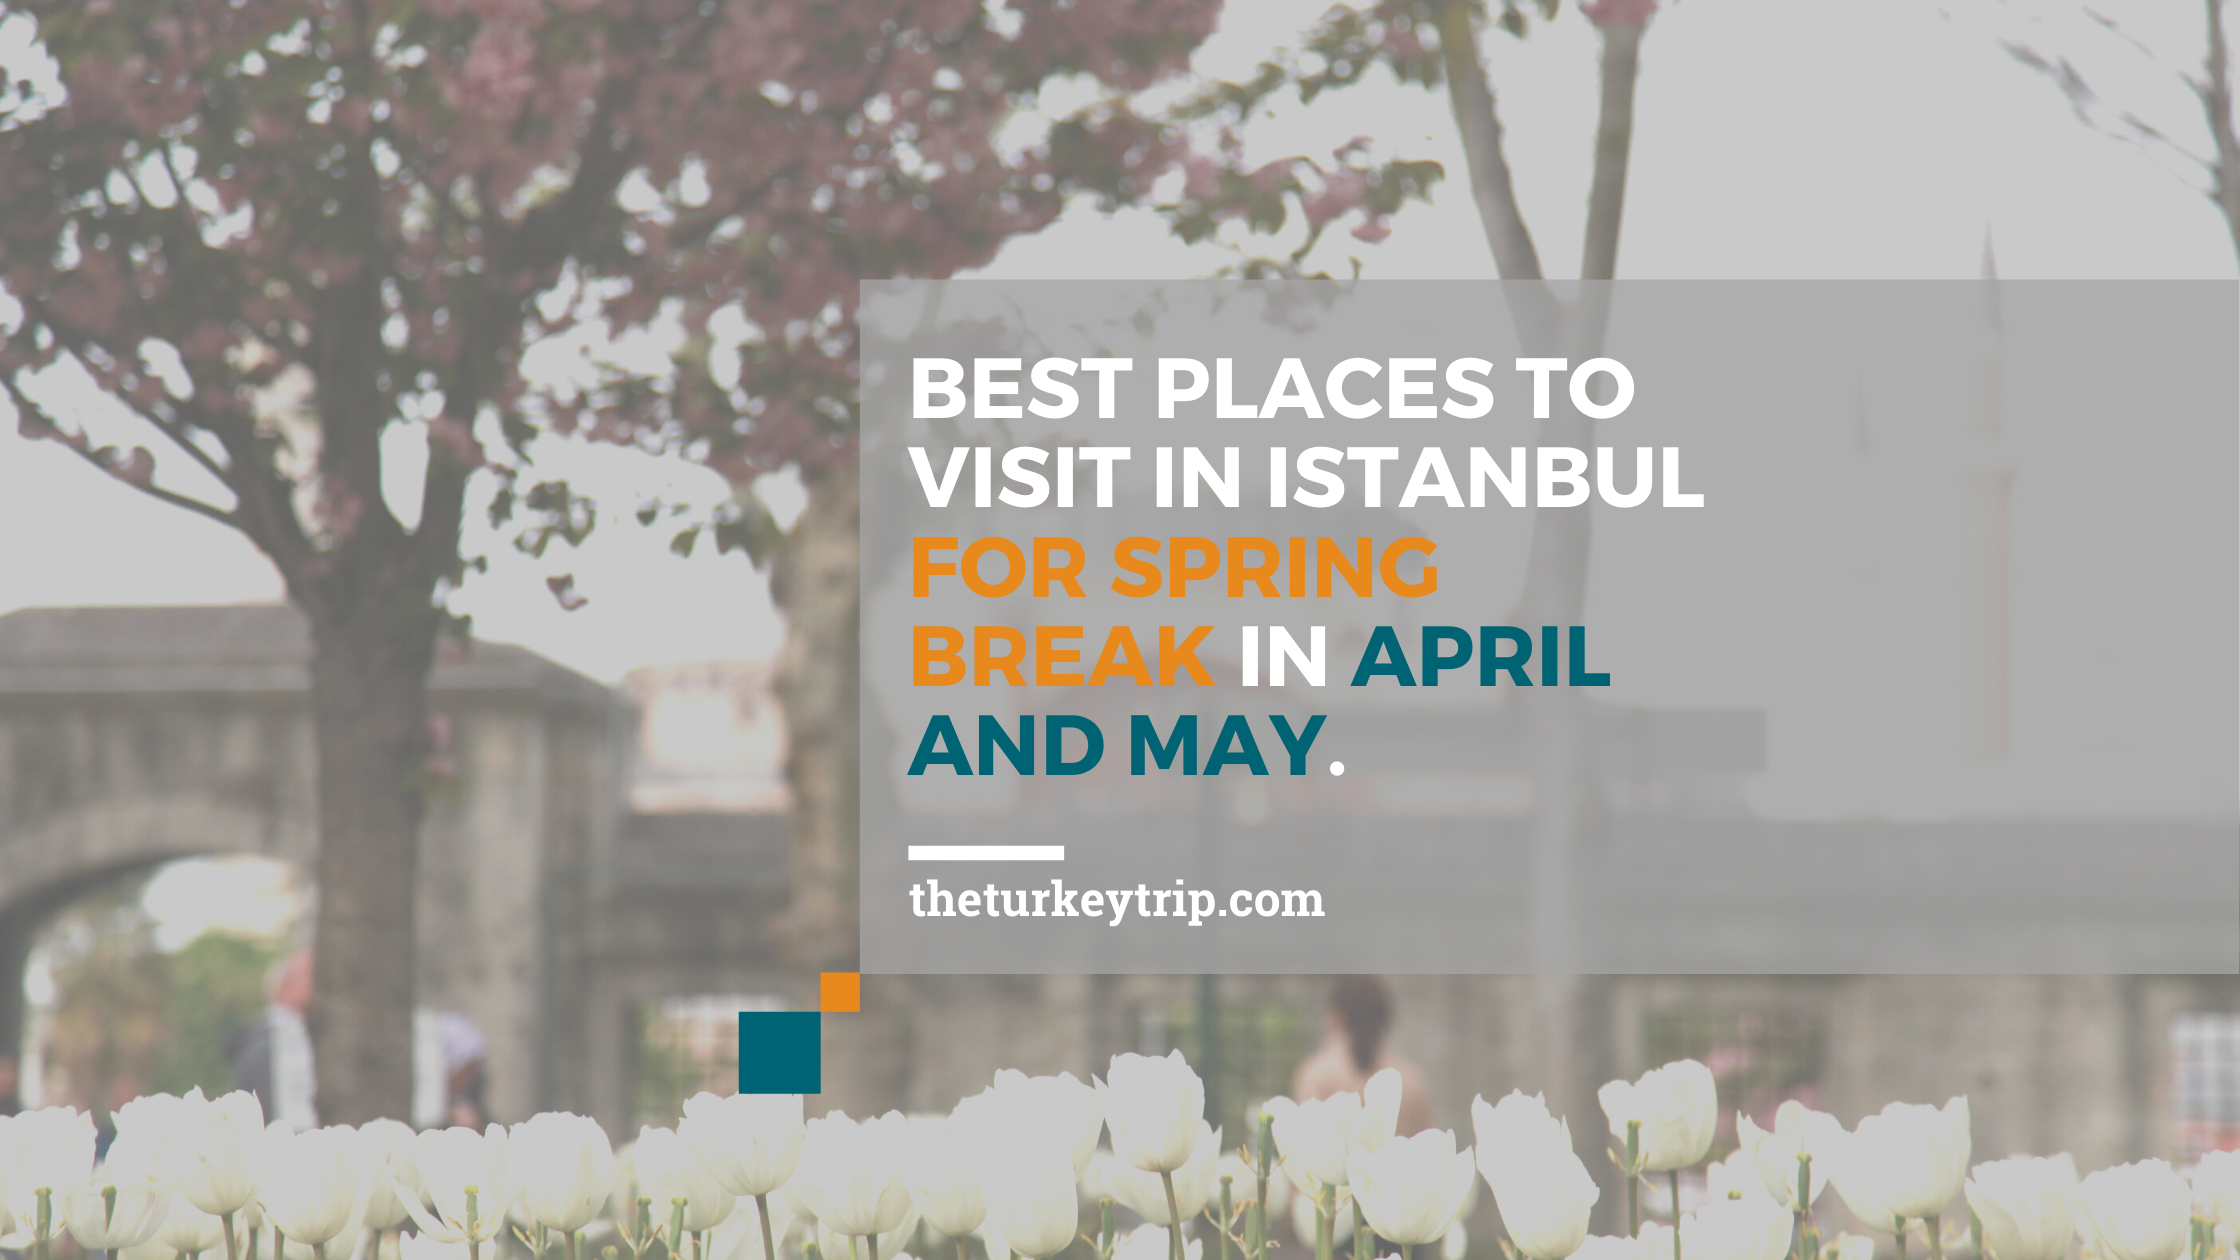 Best Famous Places To Visit In Istanbul Turkey For Spring Break In April And May